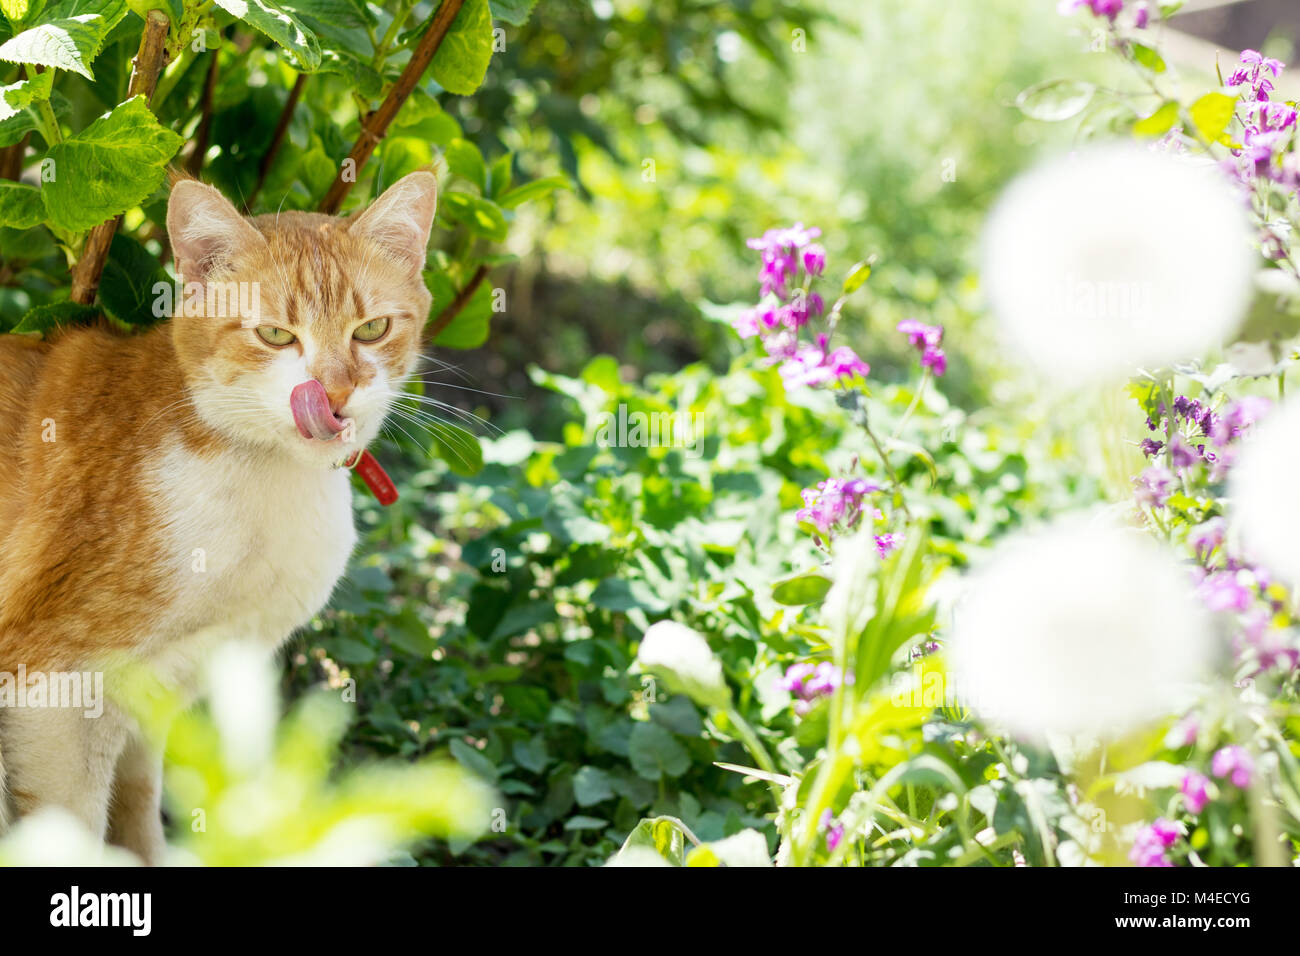 Cute white-red cat in a red collar on the garden Stock Photo